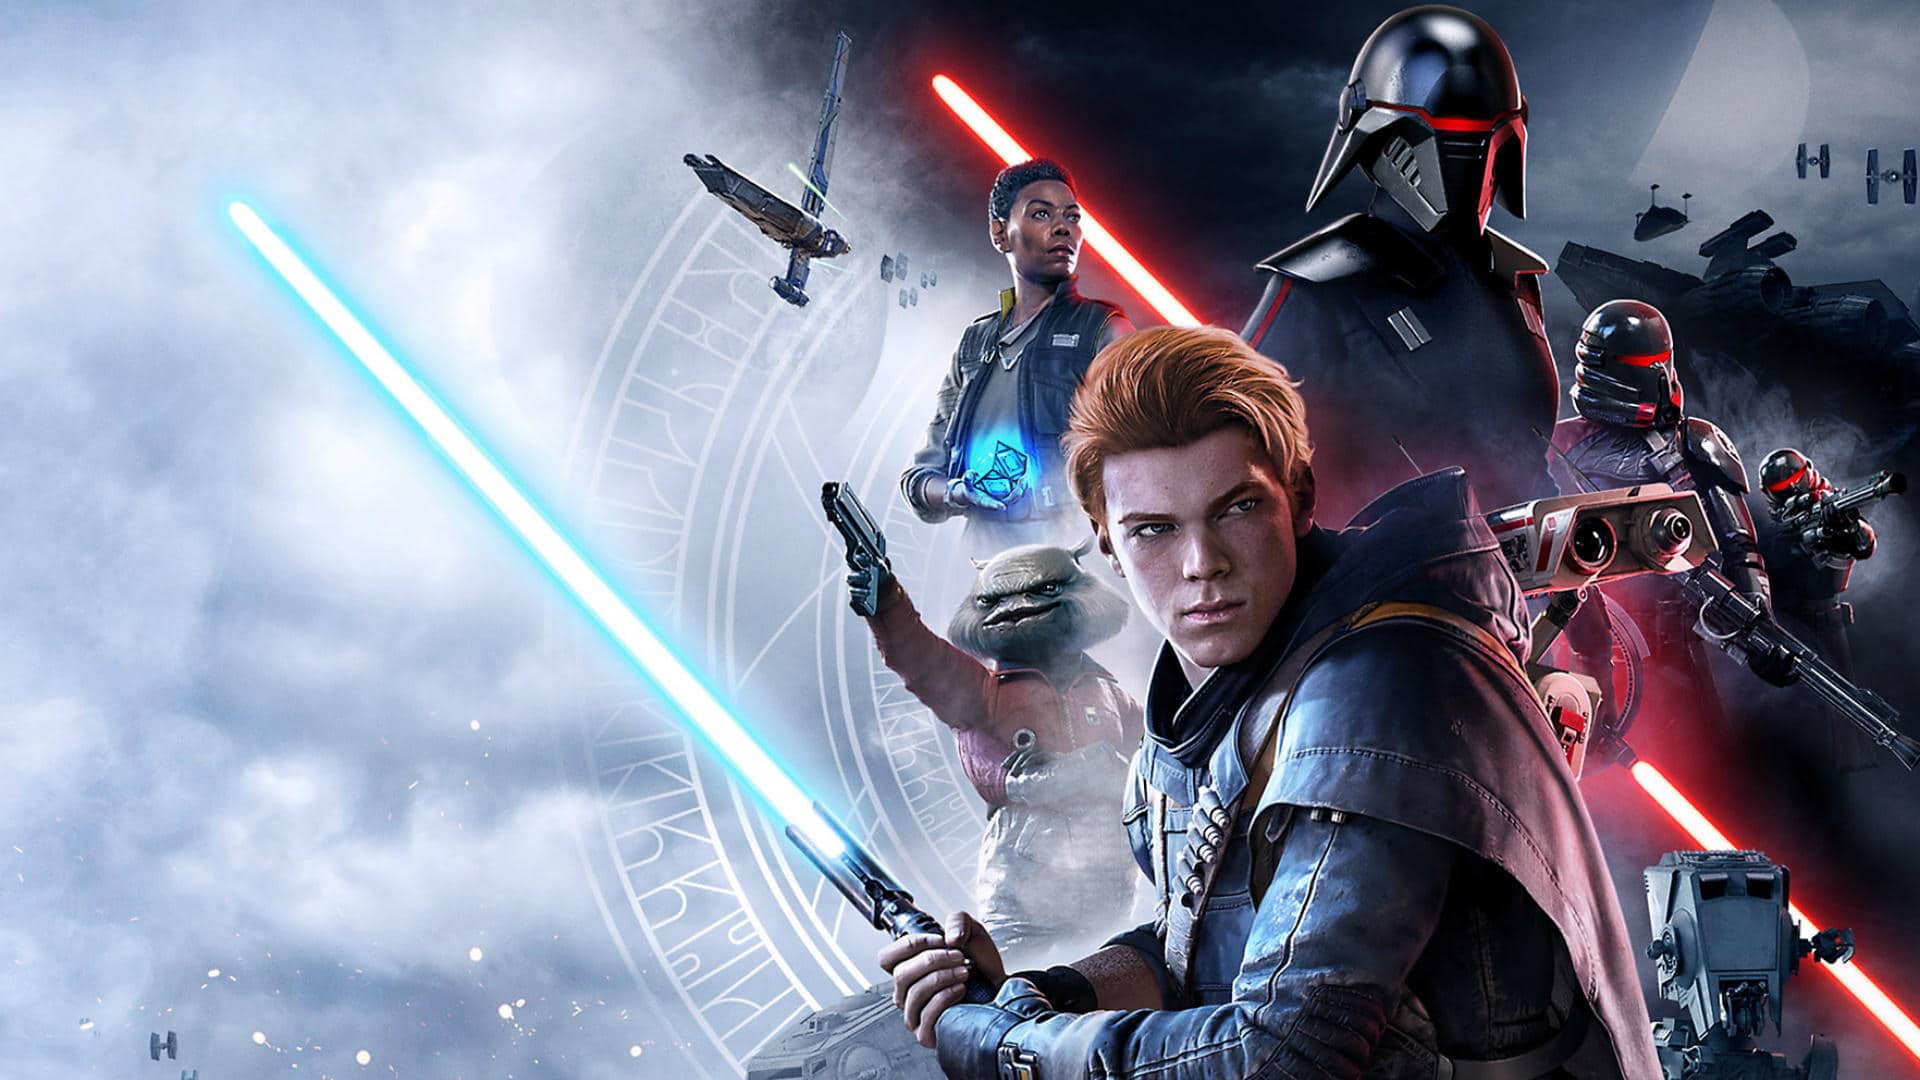 Xbox Game Pass Subscribers Get Star Wars Jedi: Fallen Order For Free